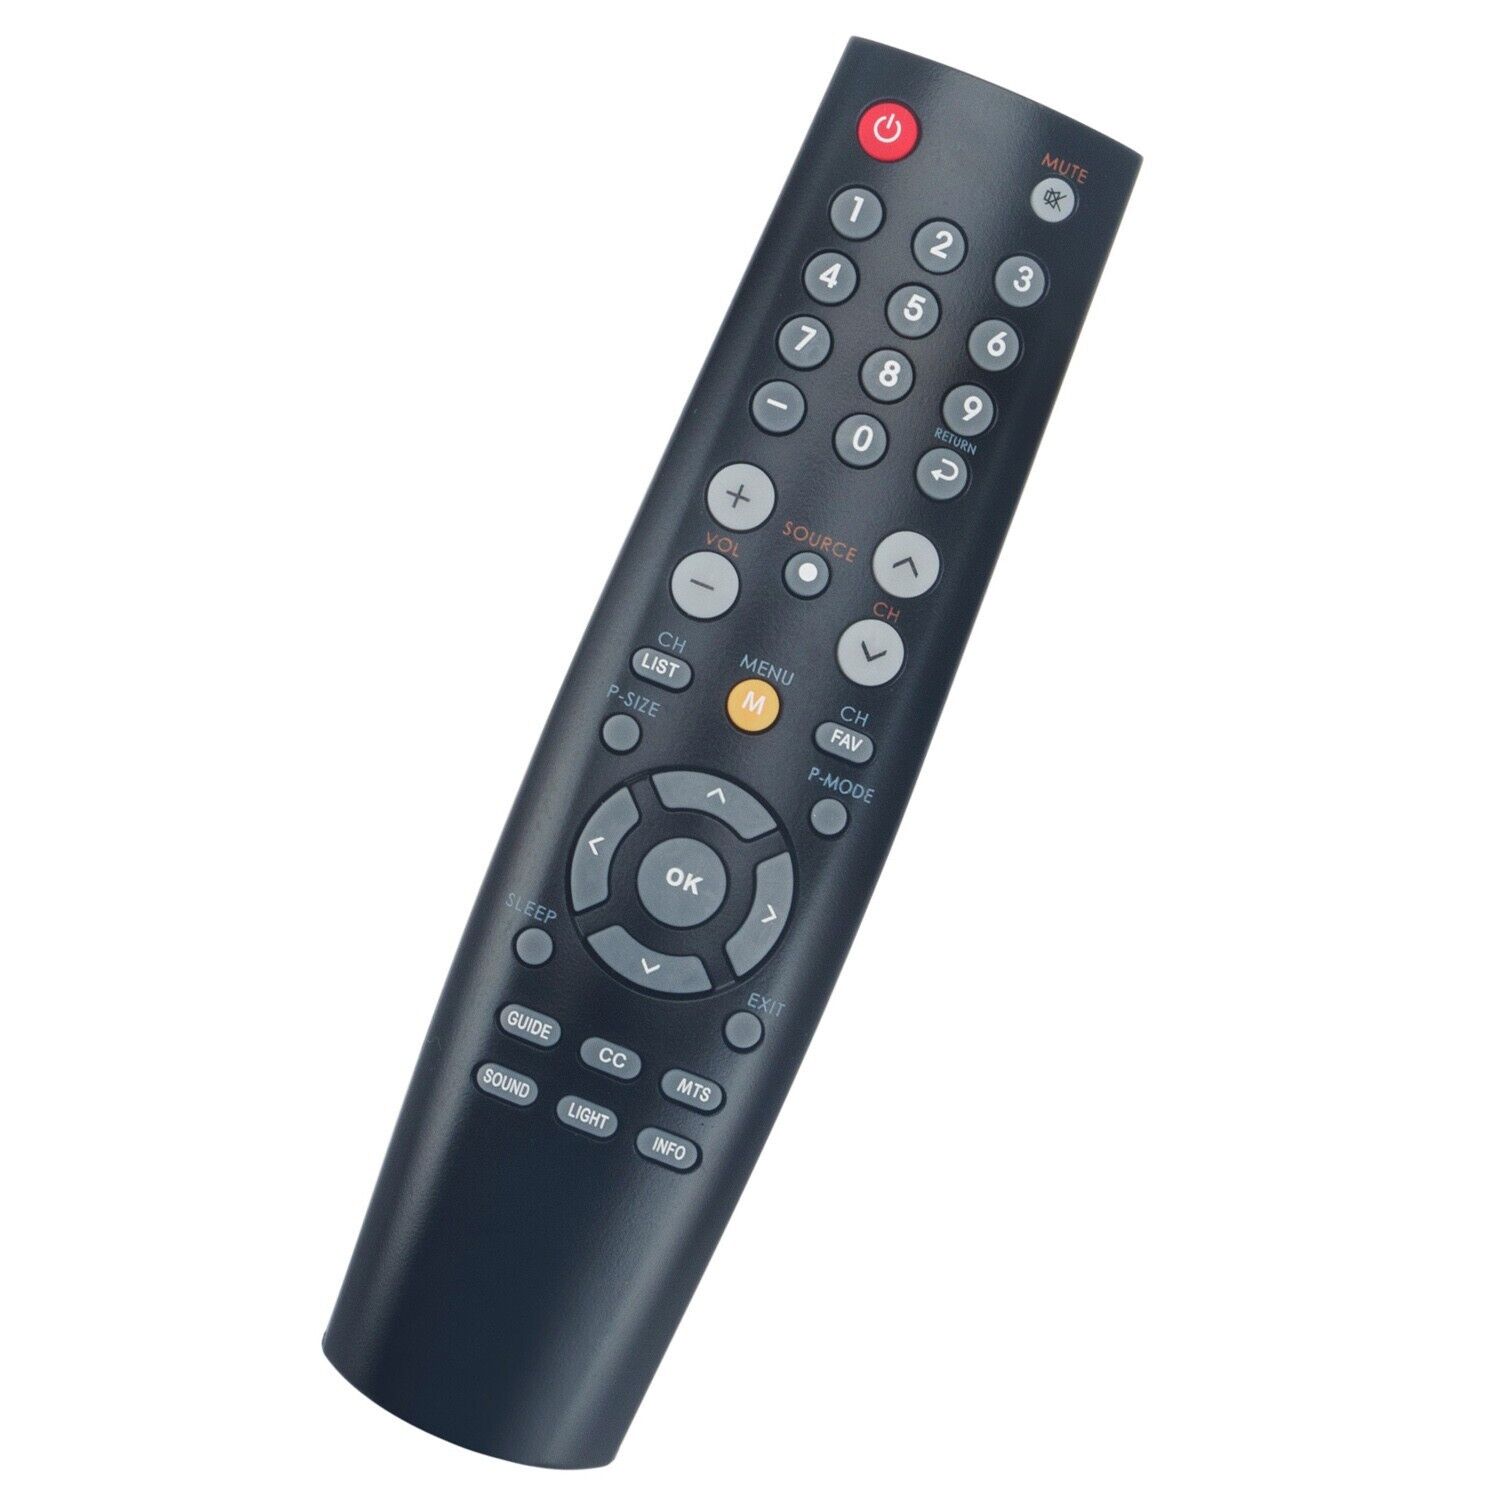 thinkstar New Replaced Remote Control For Coby Tv Ledtv3217